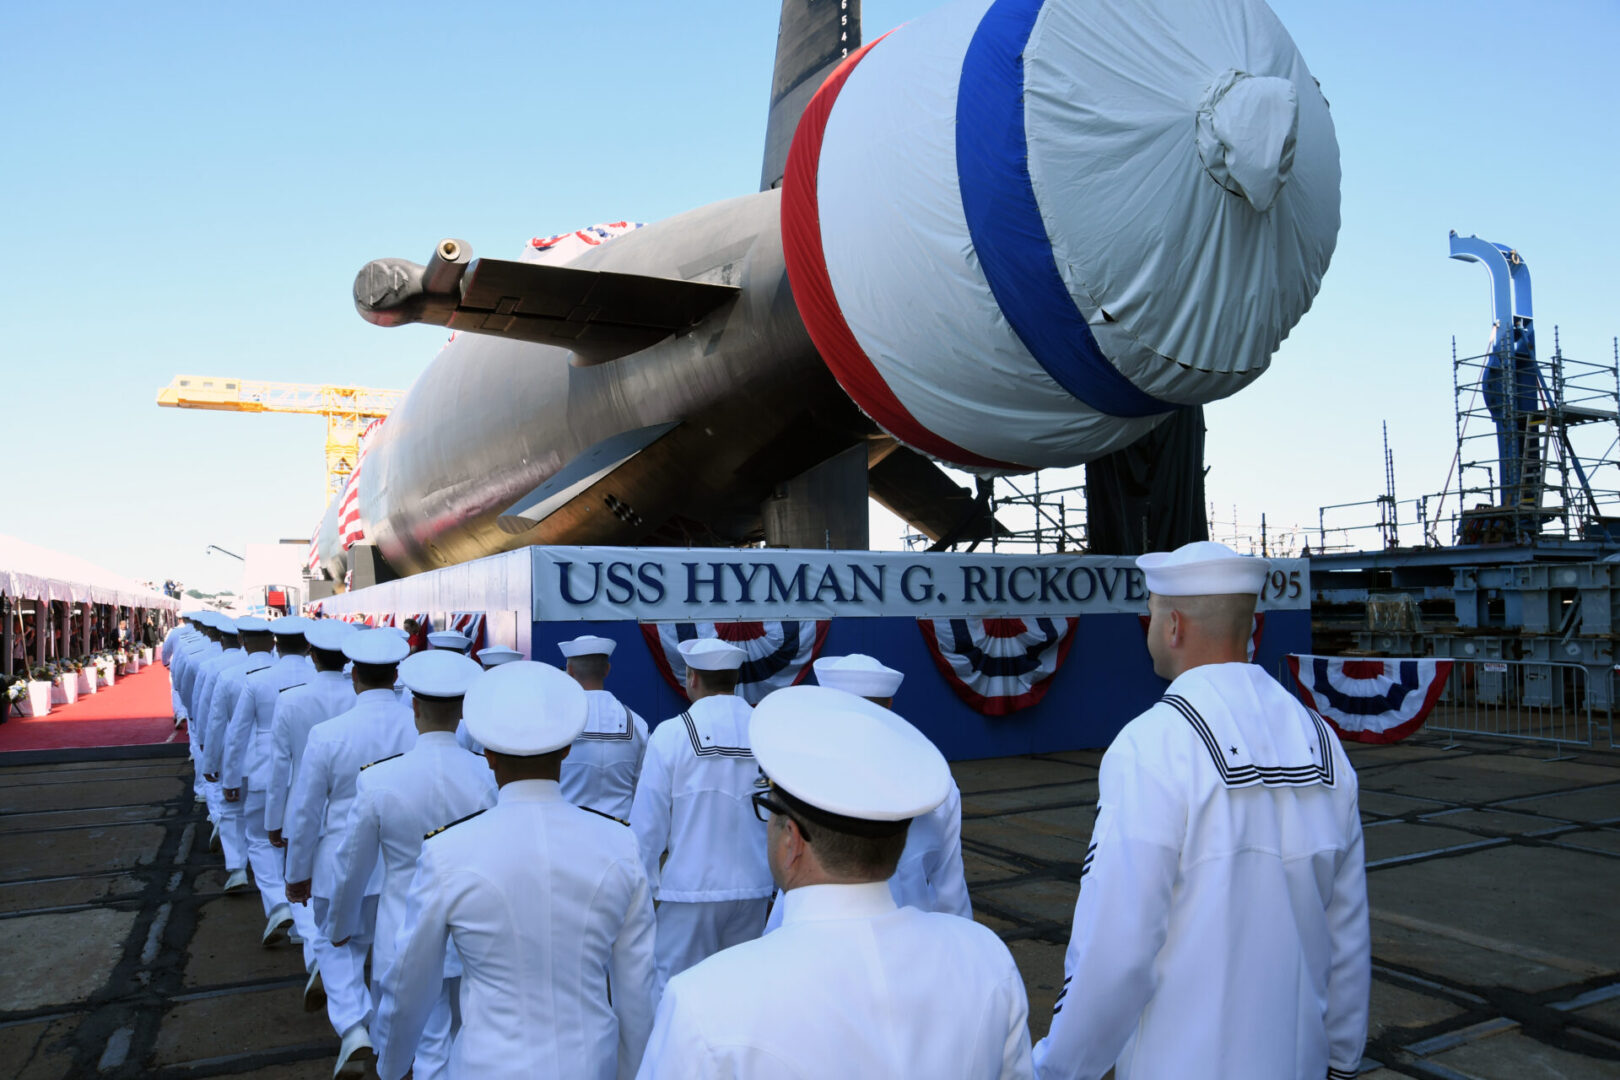 210731-N-GR655-014 GROTON, Conn. (July 31, 2021) – The crew of the pre-commissioning unit (PCU) Hyman G. Rickover (SSN 795) march in formation during a christening ceremony at General Dynamics Electric Boat shipyard facility in Groton, Conn., July 31, 2021. Rickover and crew will operate under Submarine Squadron (SUBRON) FOUR whose primary mission is to provide attack submarines that are ready, willing, and able to meet the unique challenges of undersea combat and deployed operations in unforgiving environments across the globe. (U.S. Navy photo by Chief Petty Officer Joshua Karsten/RELEASED)